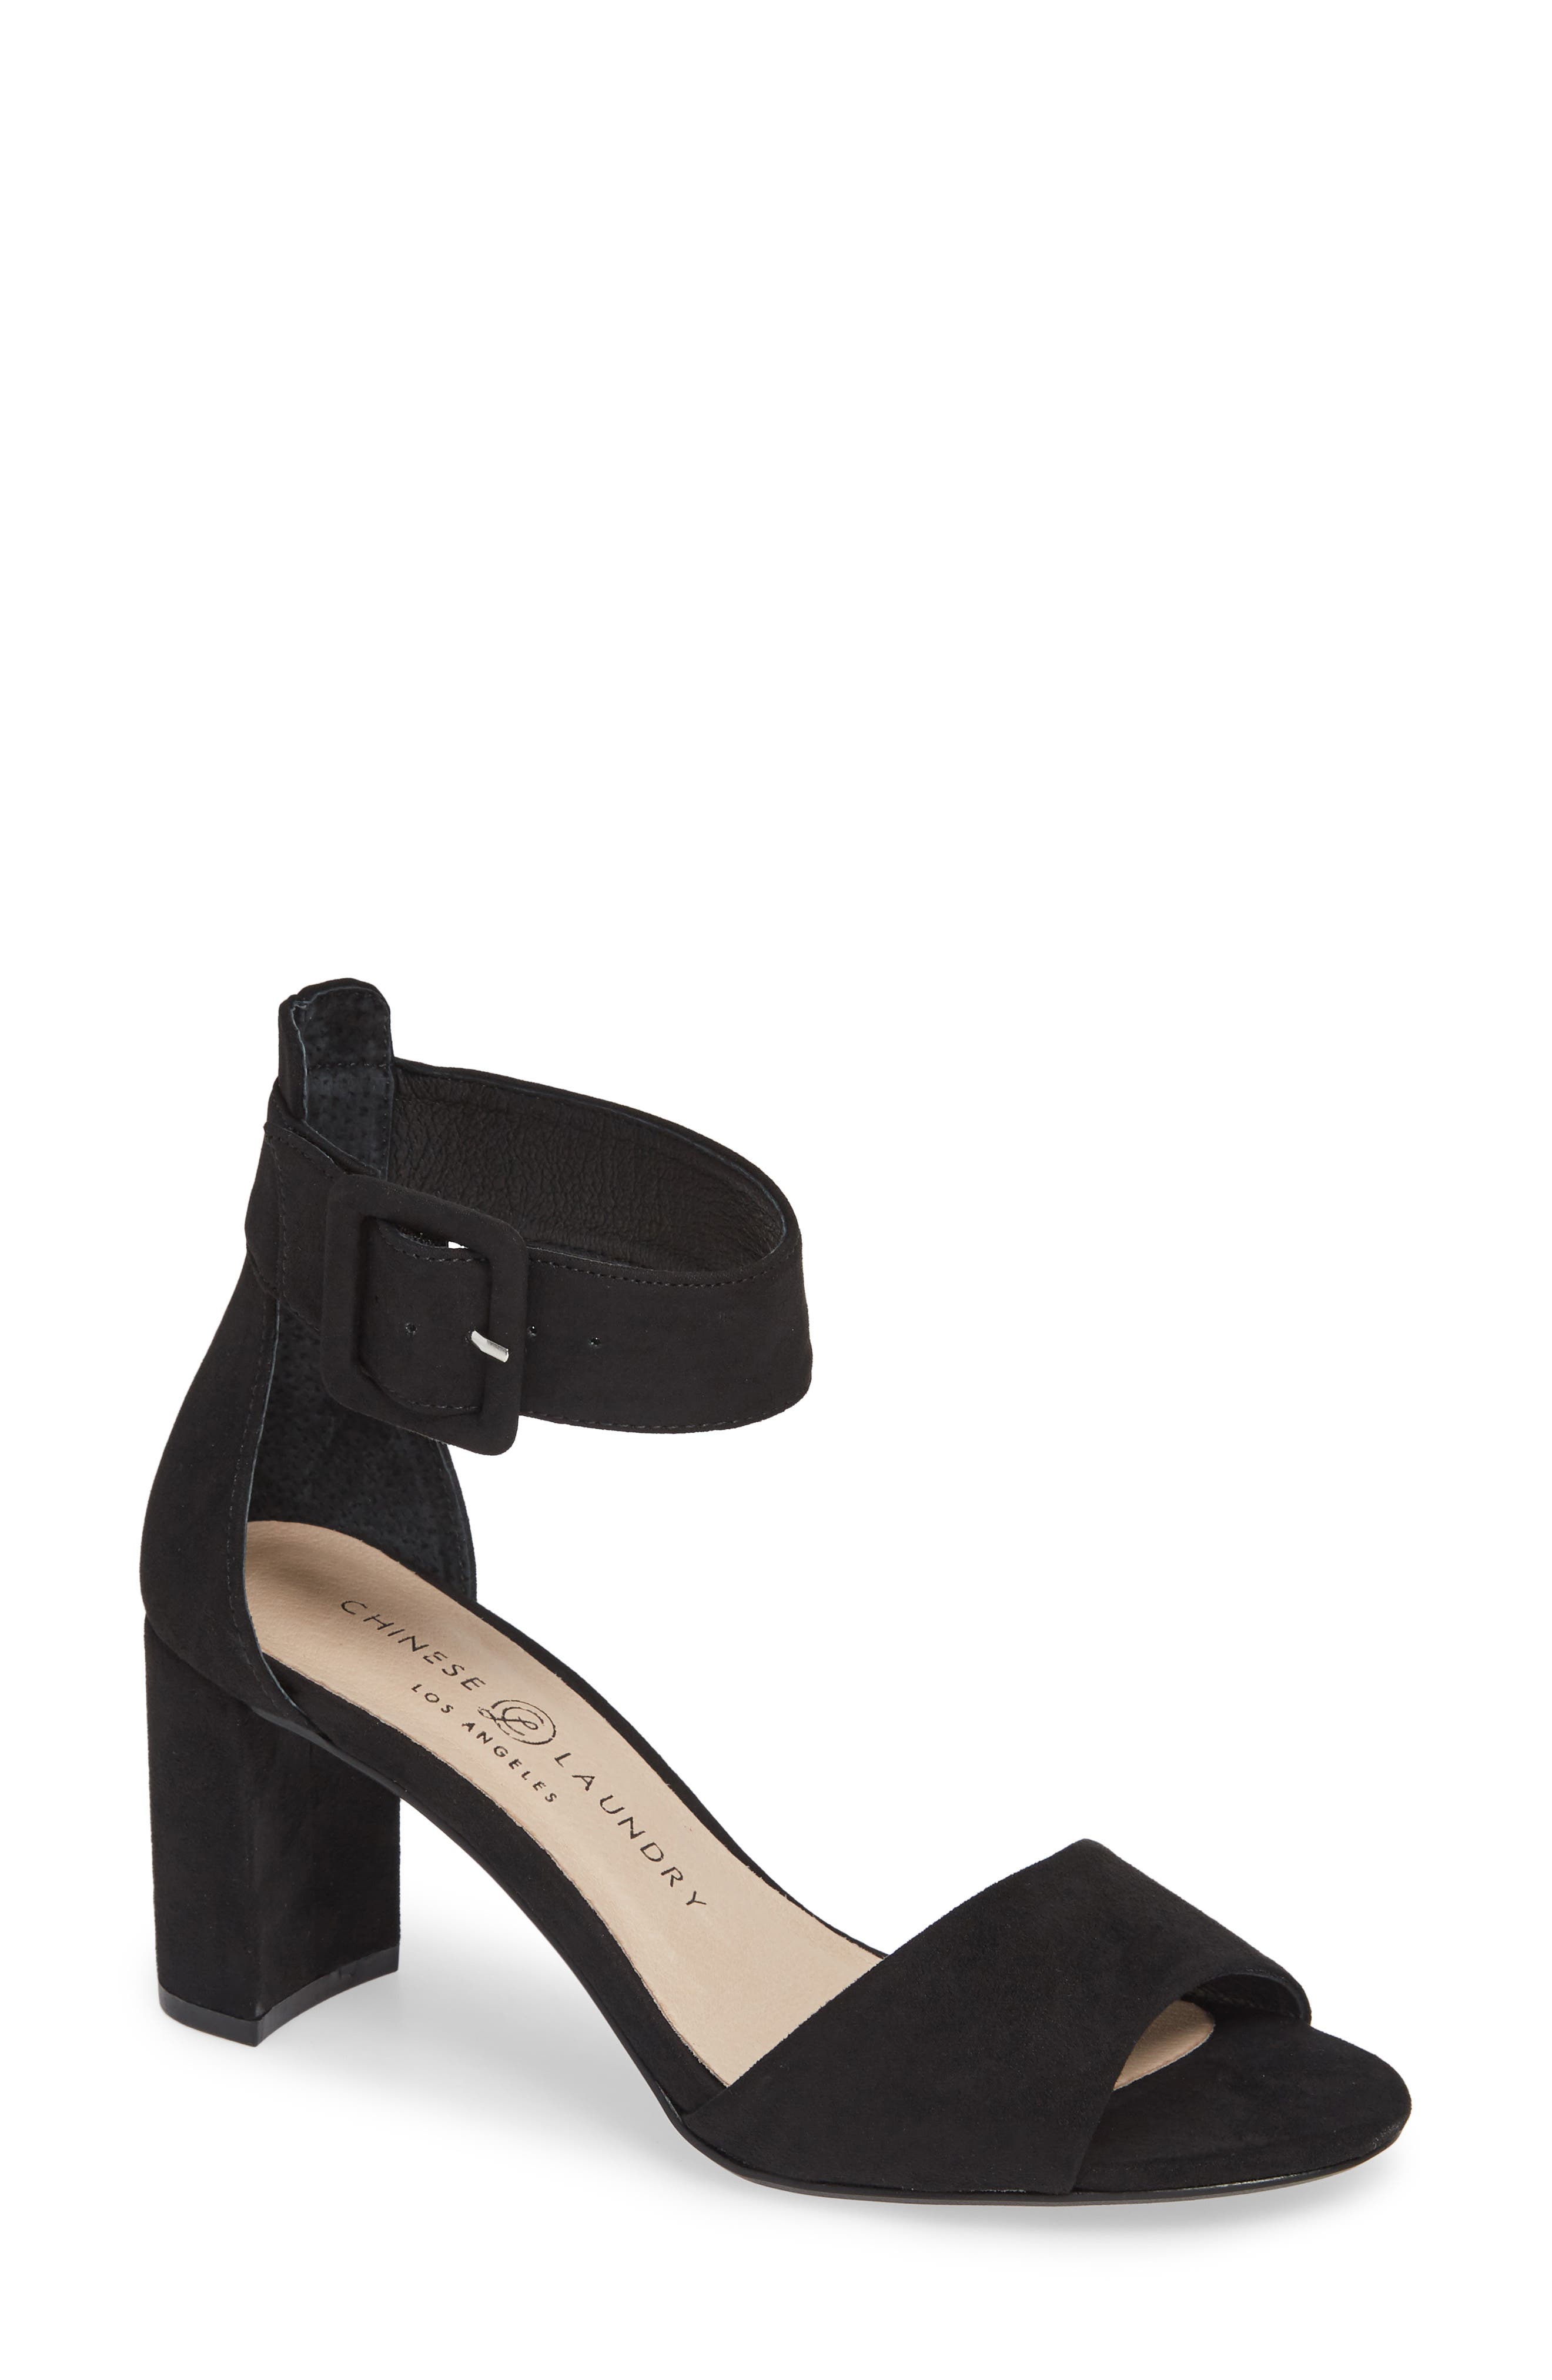 chinese laundry black strappy heels